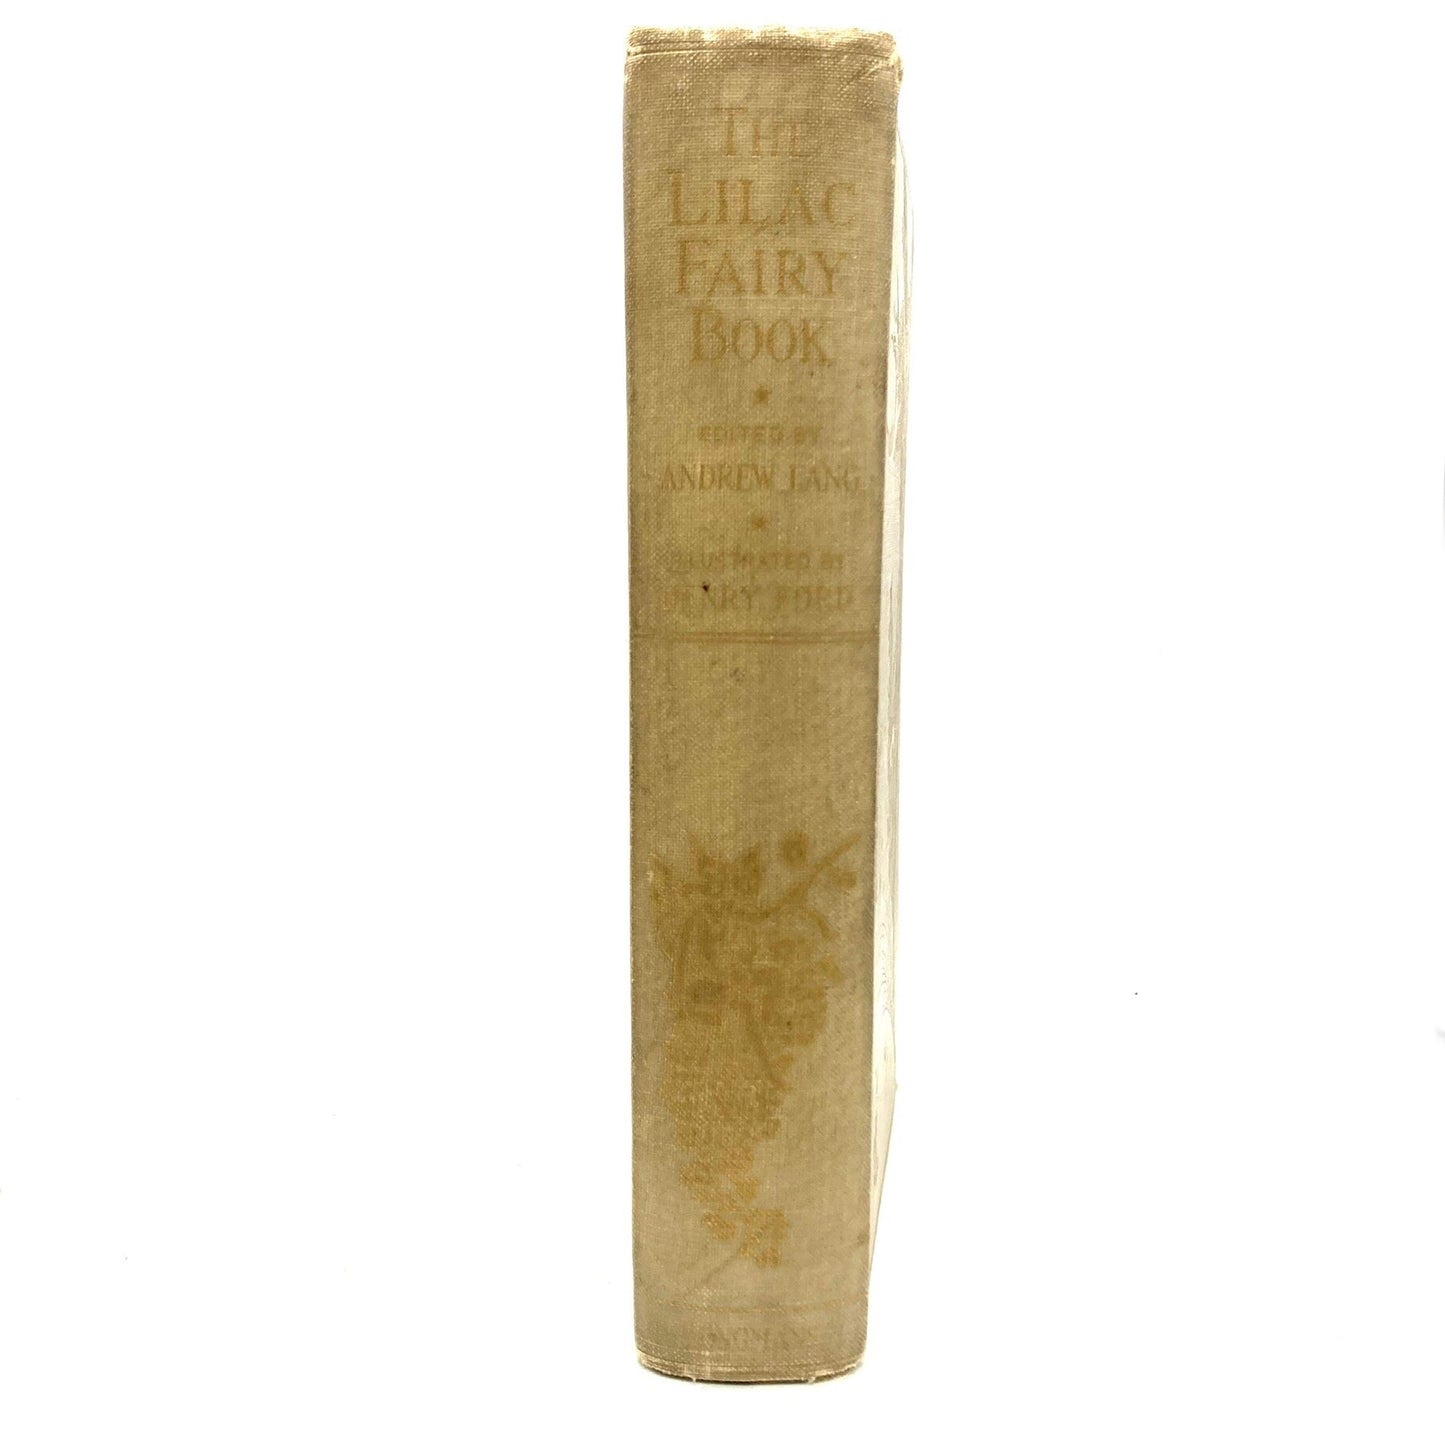 LANG, Andrew "The Lilac Fairy Book" [Longmans, Green & Co, 1910] 1st Edition - Buzz Bookstore